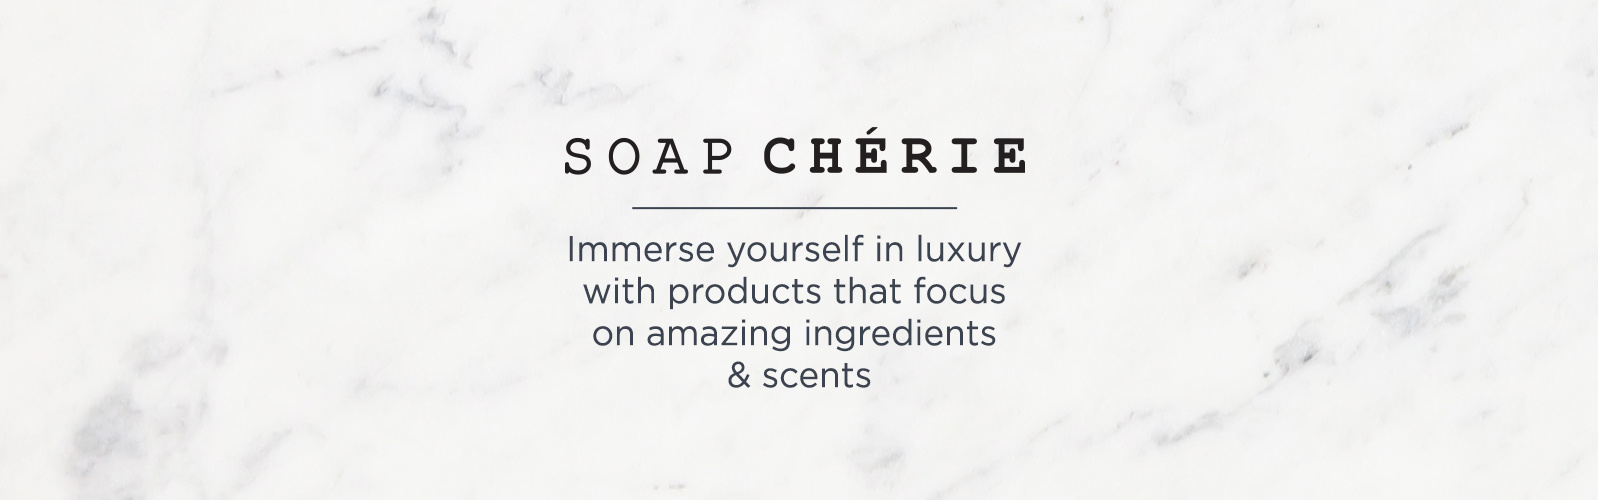 Soap Chérie.  Immerse yourself in luxury with products that focus on amazing ingredients & scents